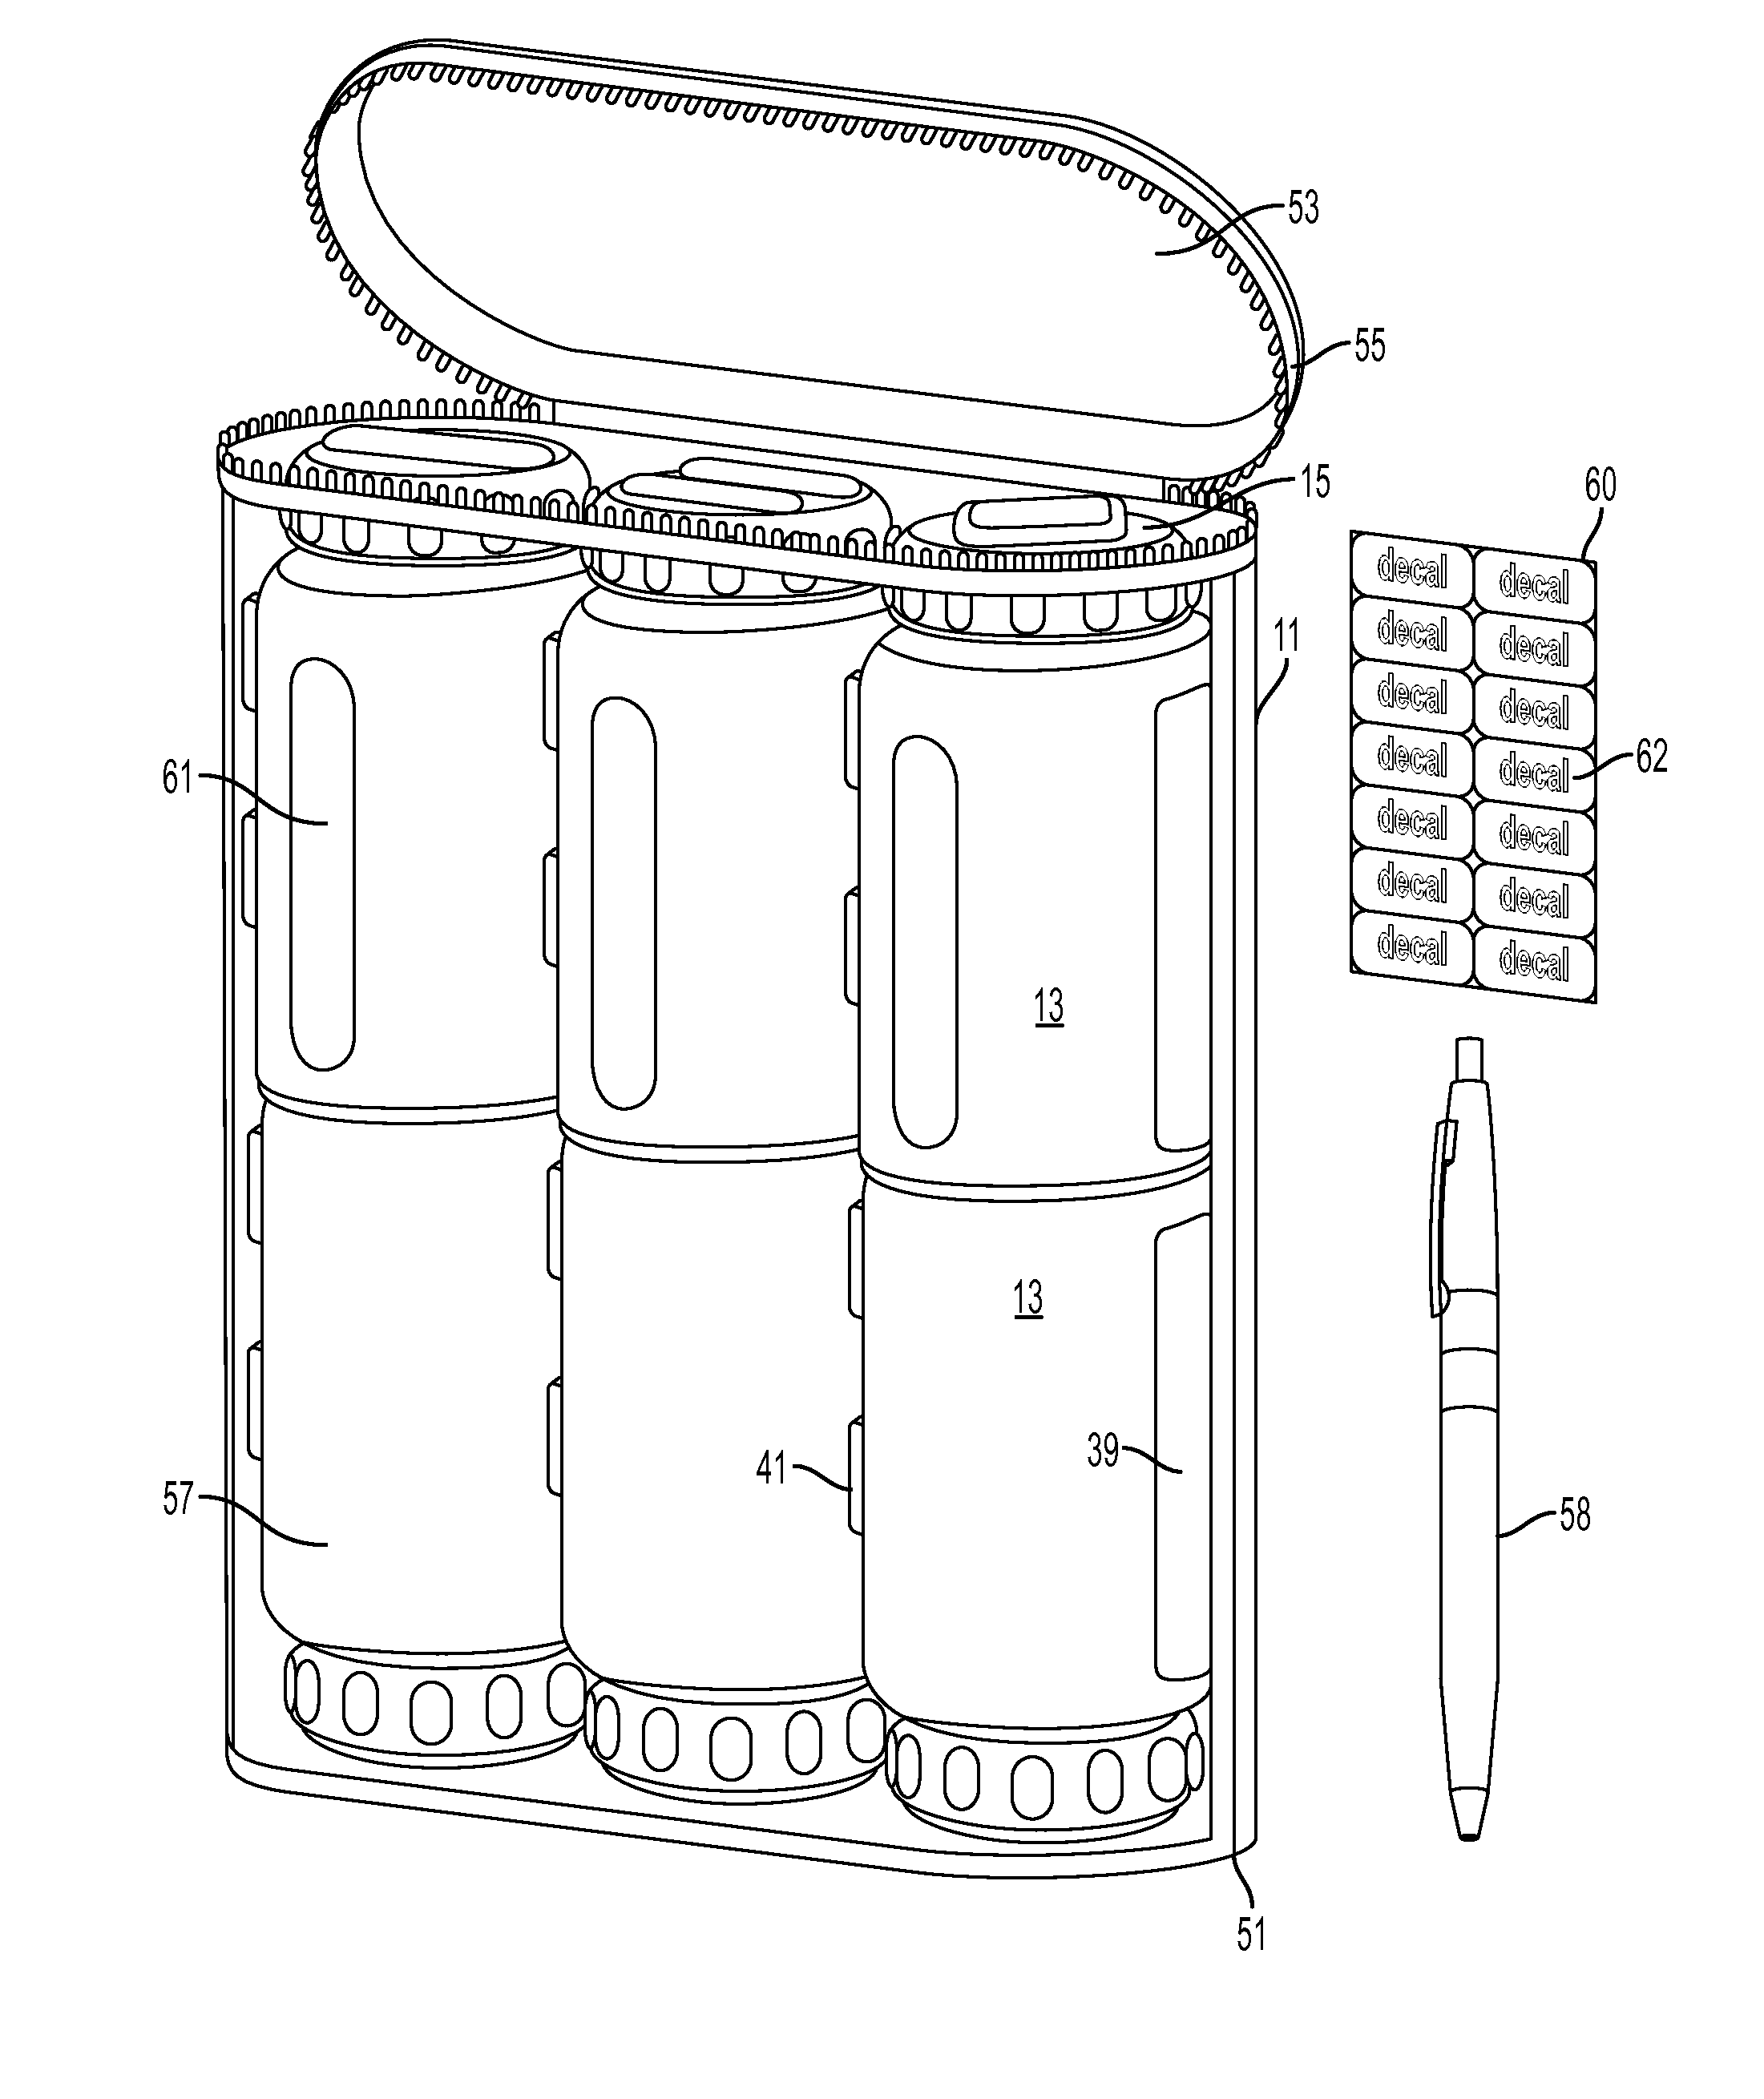 System, method and appartus for travel accessory